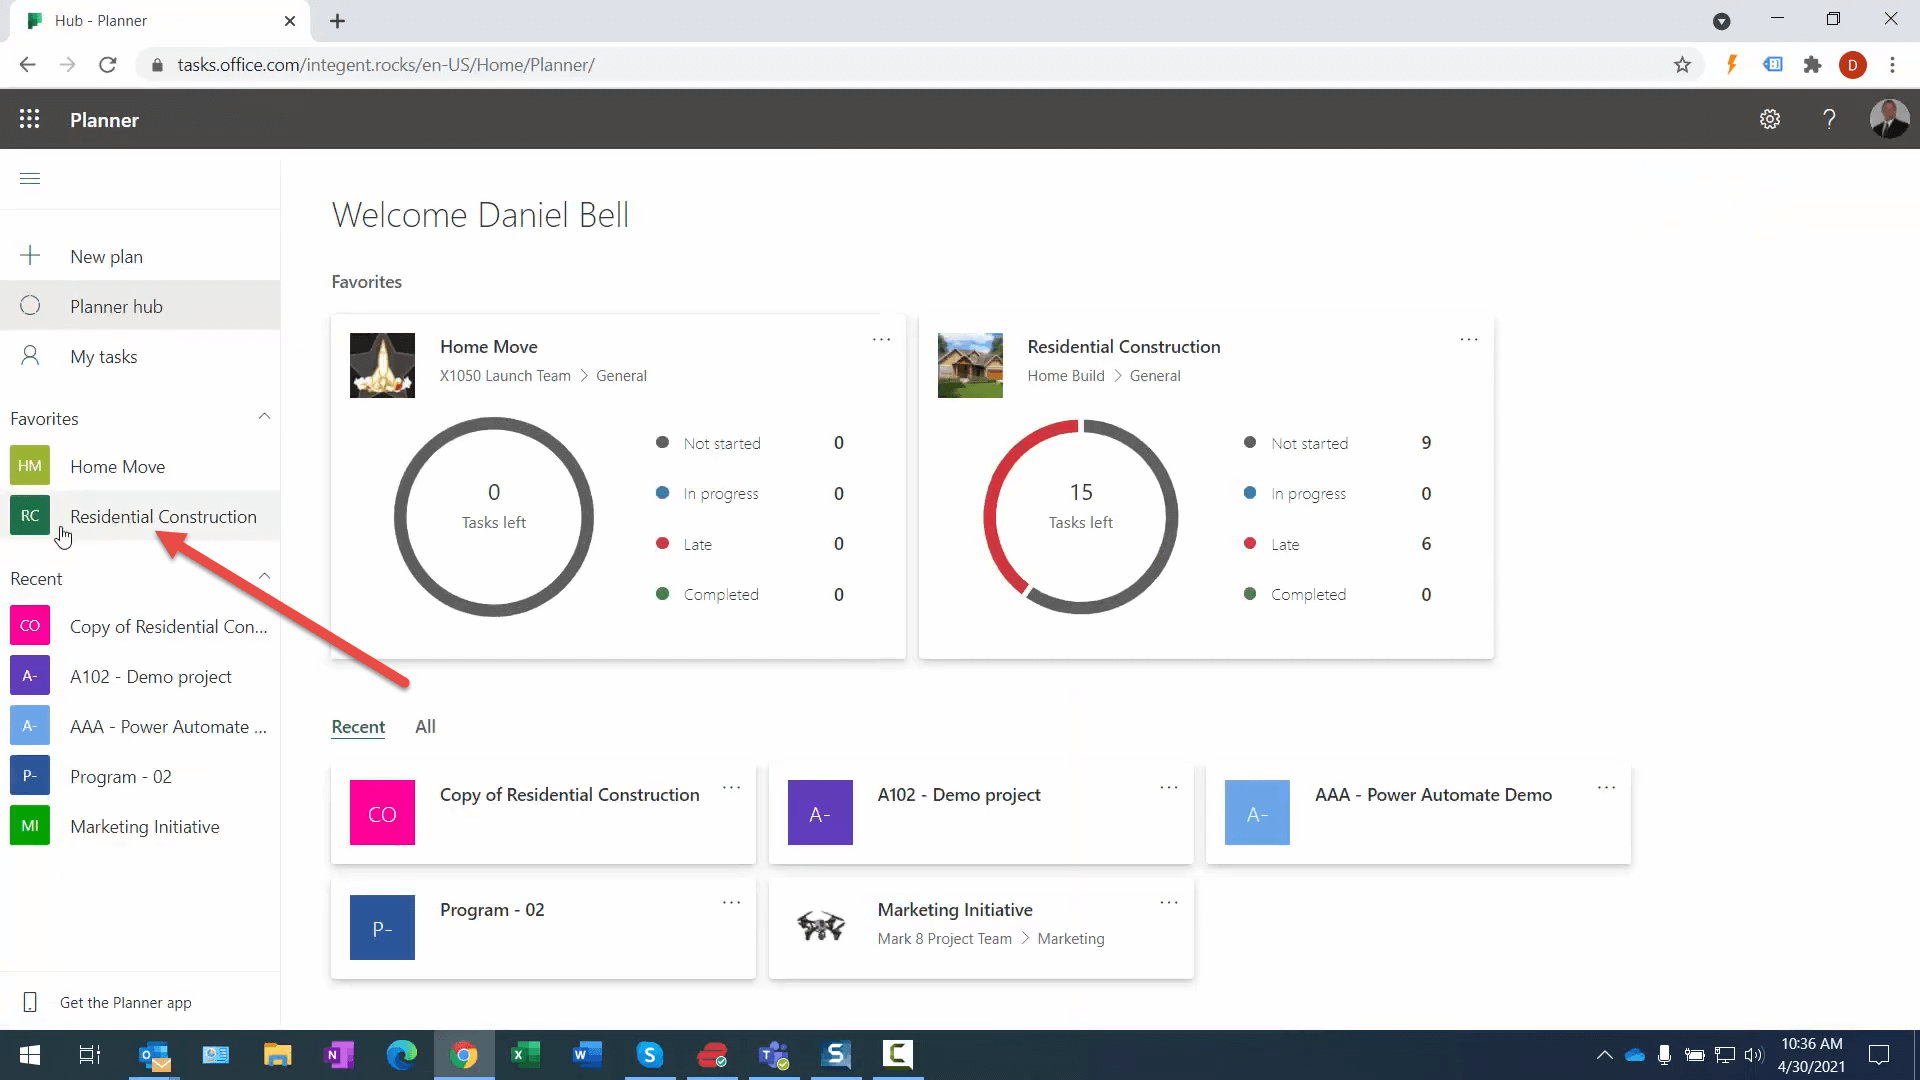 Microsoft Planner shows my project in the Favorits navigation in on the left